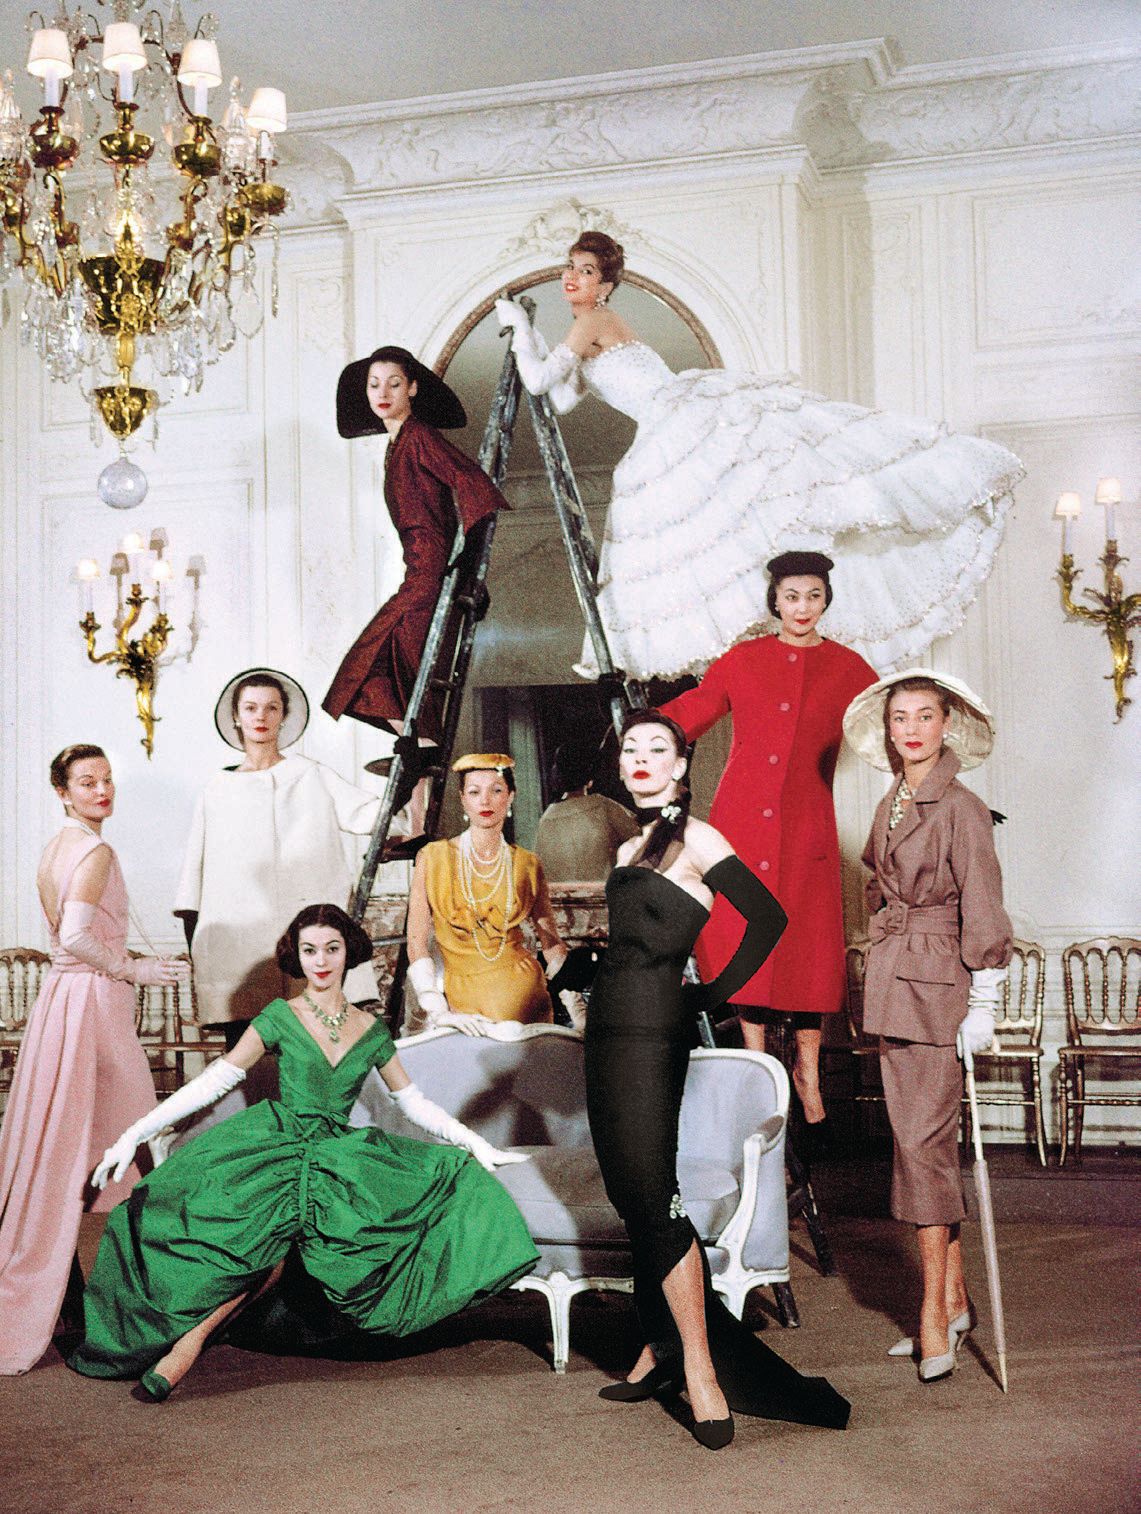 The maison’s spring/summer 1957 haute couture collection that embodies the “Age of Dior” era. PHOTO: BY LOOMIS DEAN/COURTESY OF THE LIFE PICTURE COLLECTION AND SHUTT ERSTOCK